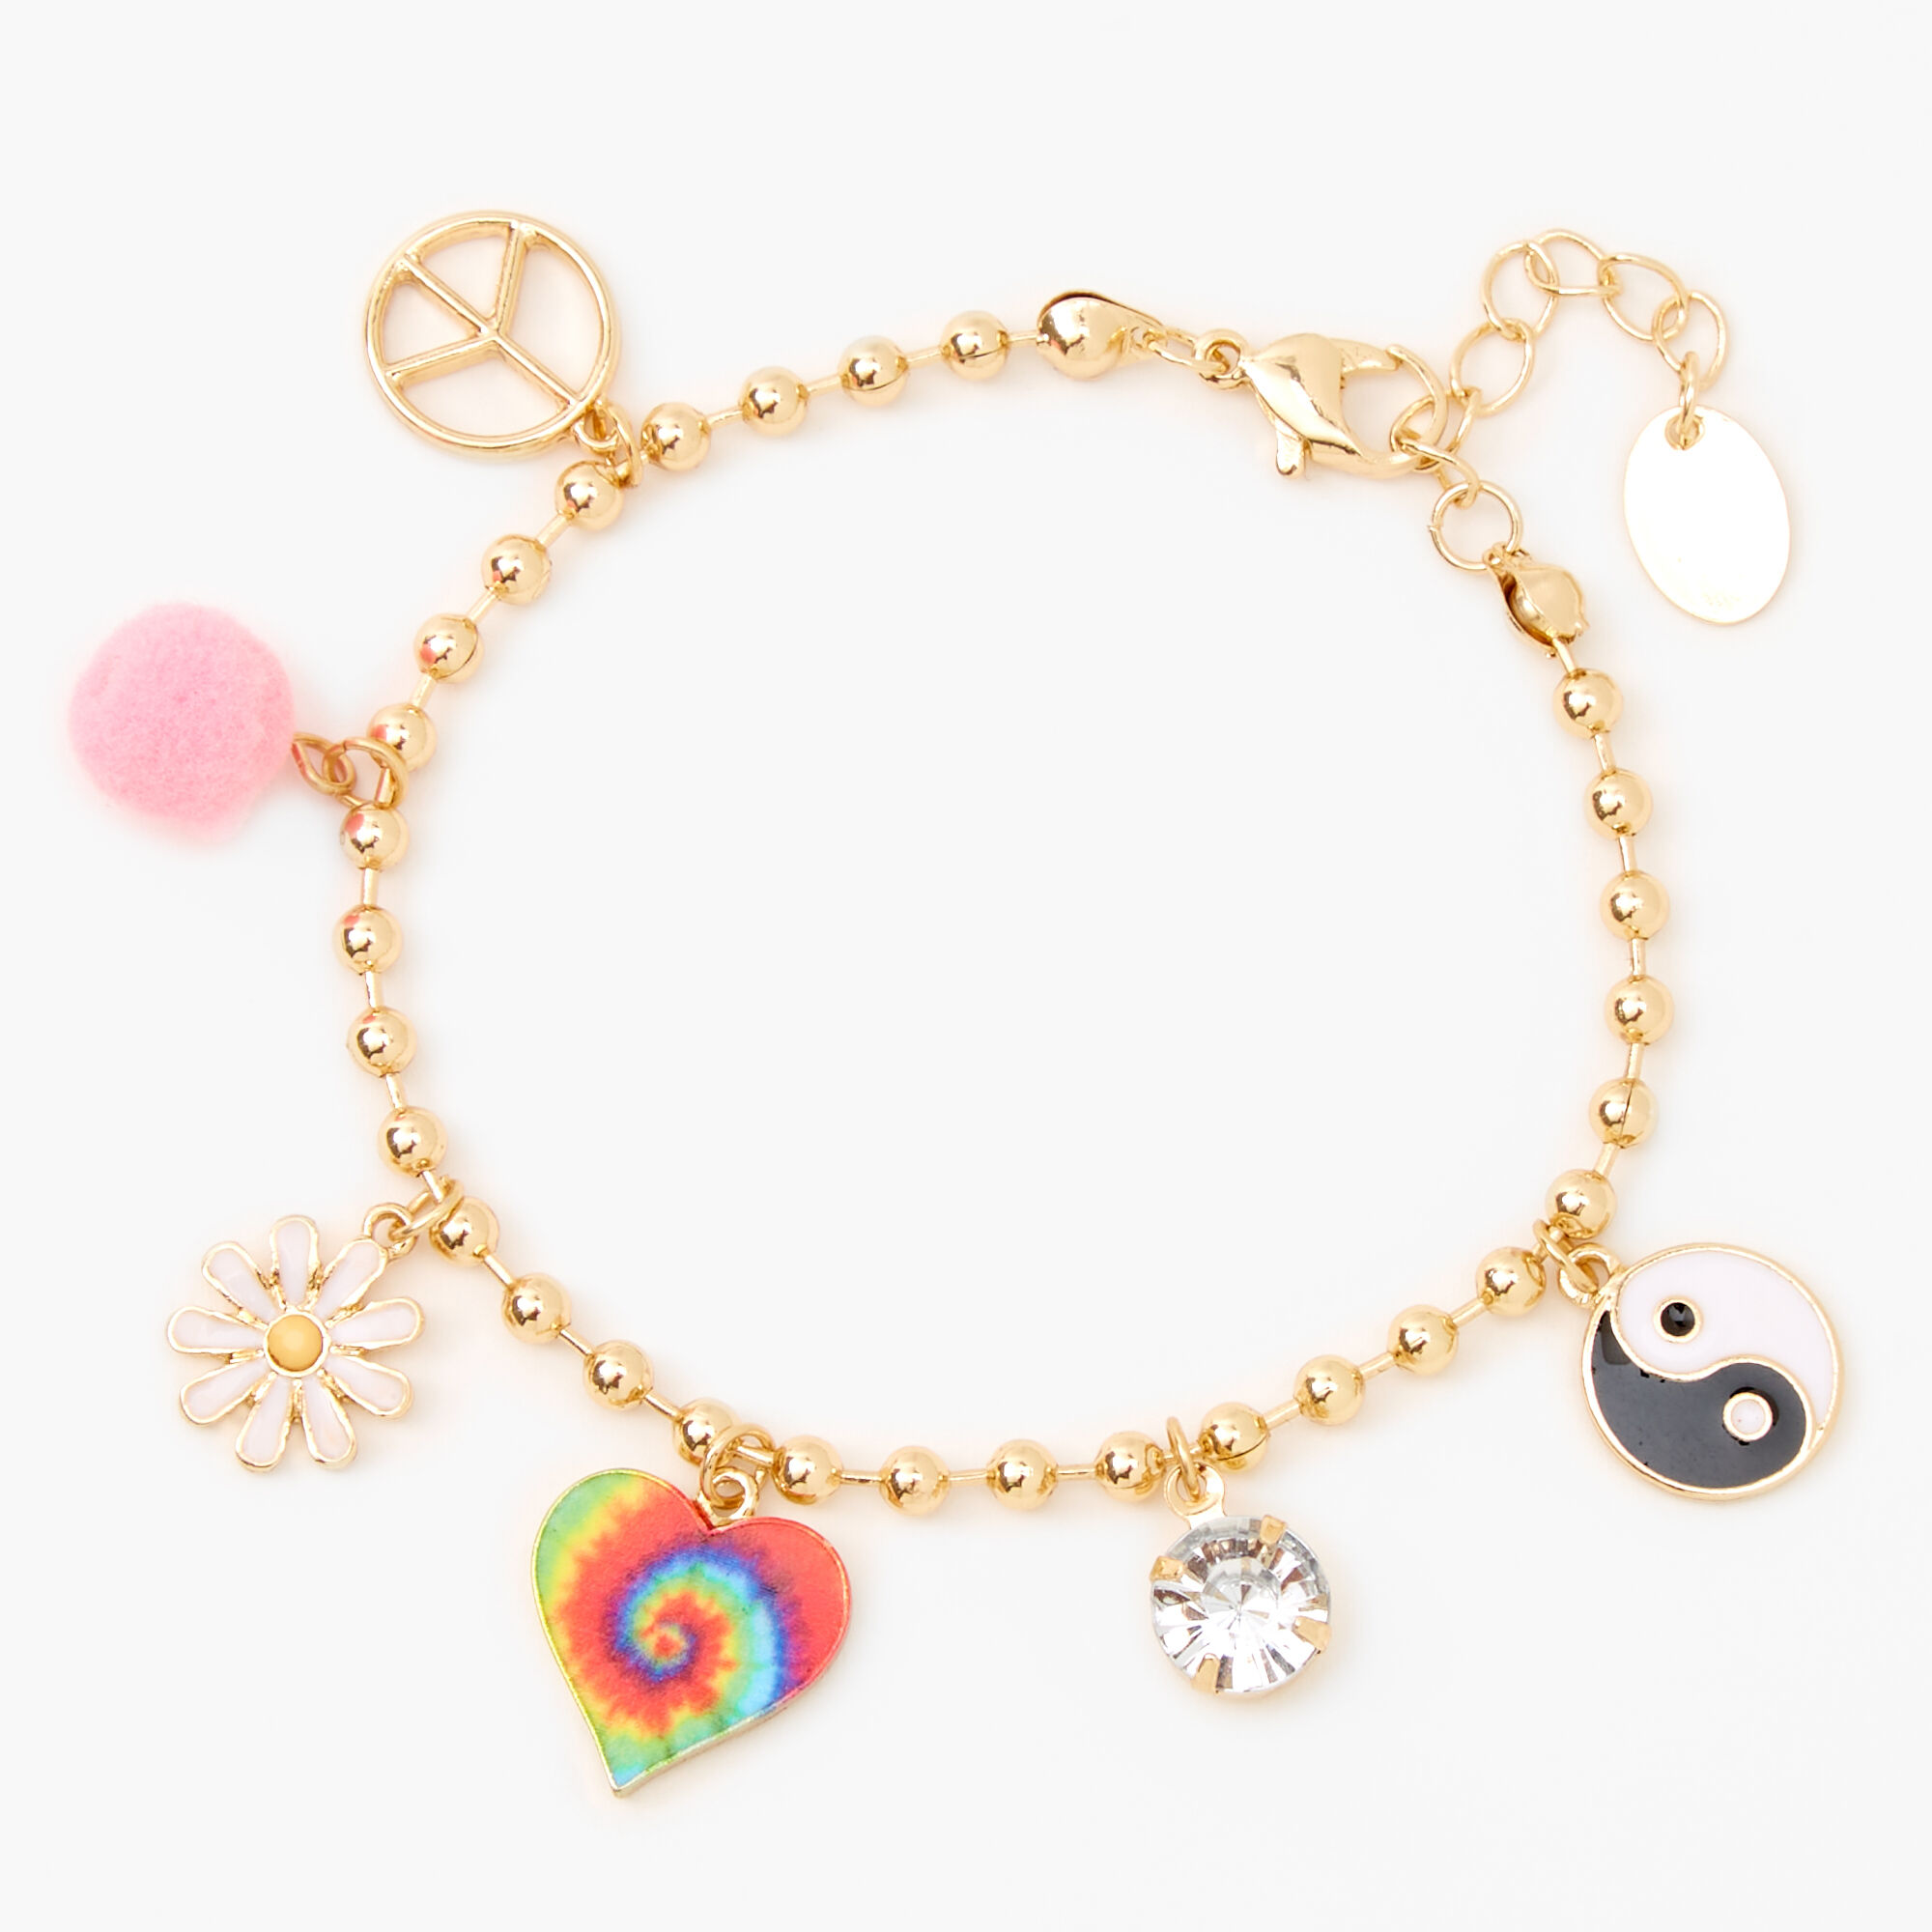 9 Charm Bracelets From The Early 2000s That Were Totes Adorbs — PHOTOS